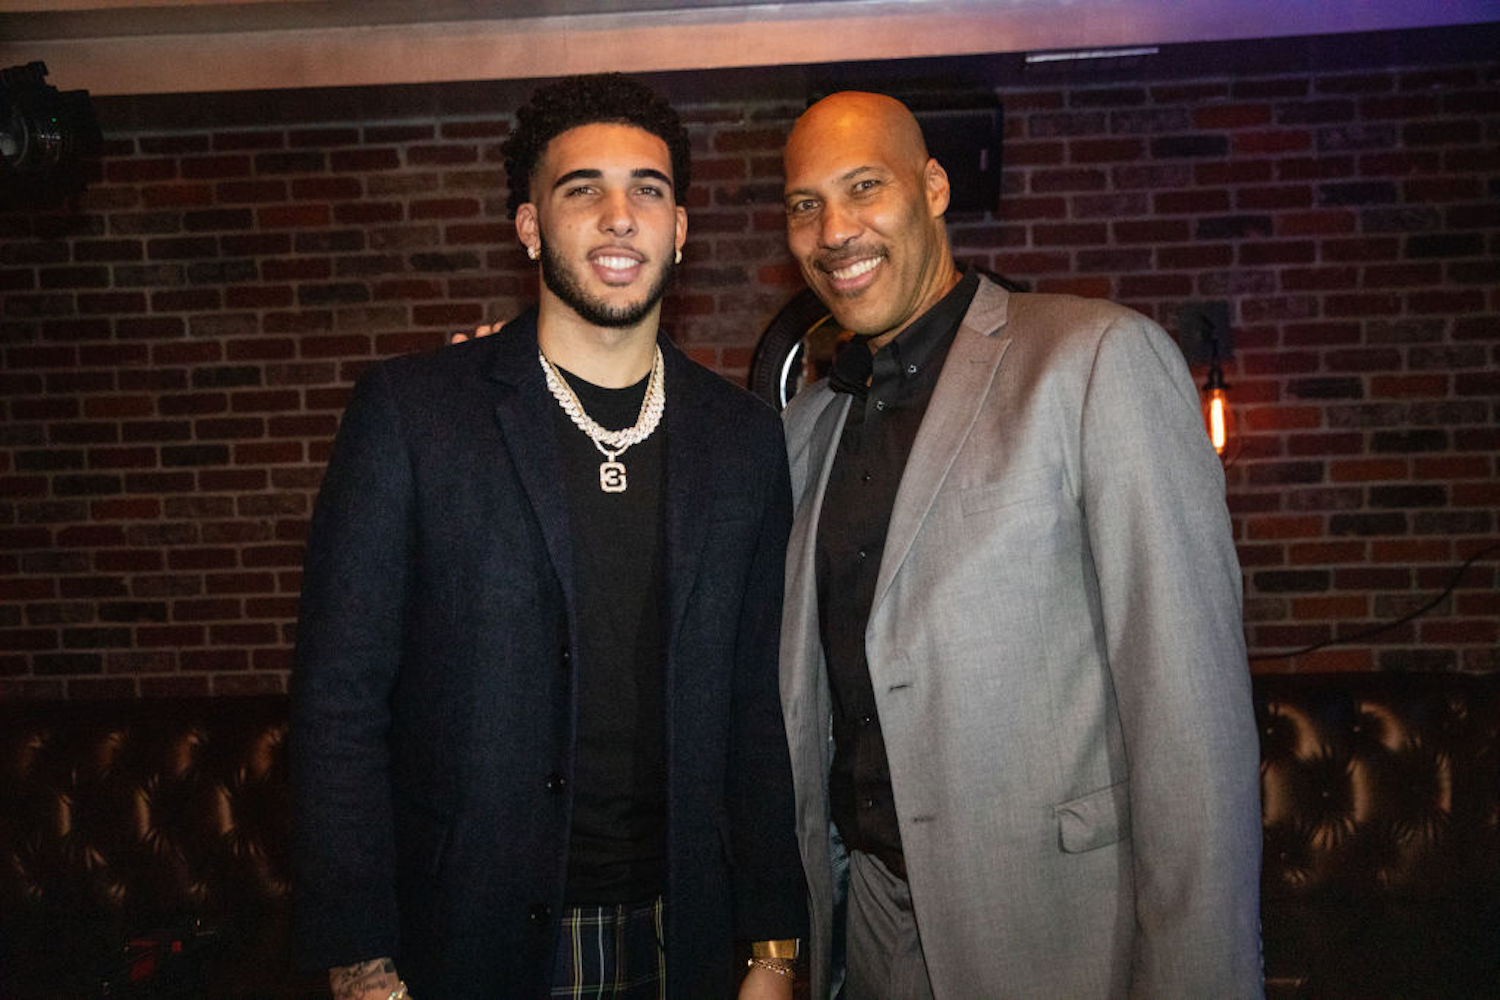 The Detroit Pistons released LiAngelo Ball less than two weeks after signing him, and LaVar Ball had some harsh words for the franchise.